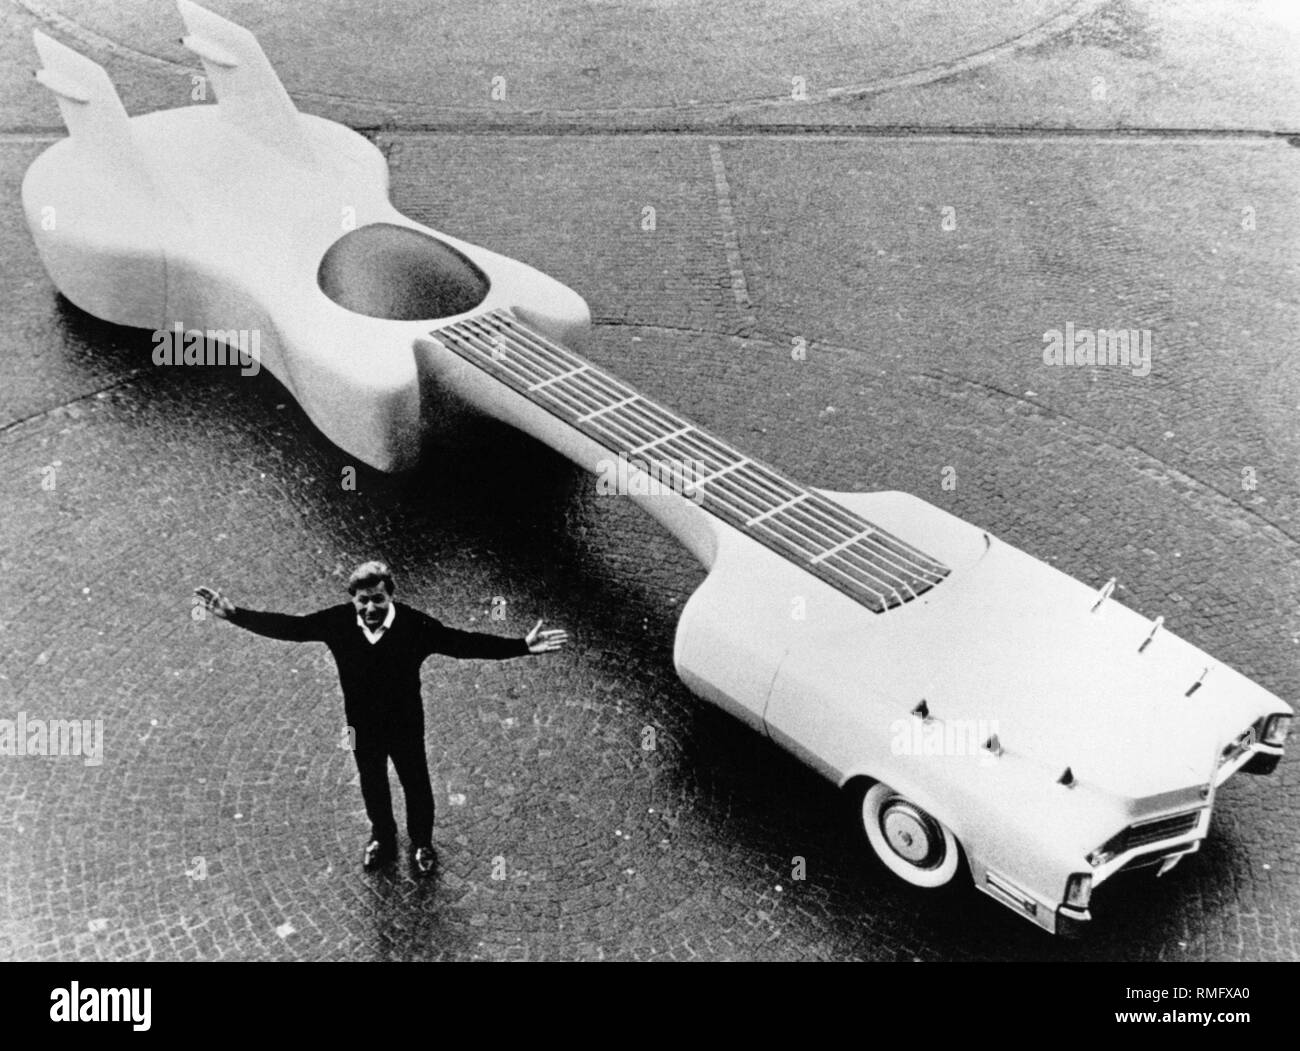 american-designer-jay-ohrberg-next-to-his-guitar-shaped-car-which-he-built-on-the-basis-of-a-cadillac-as-a-mobile-monument-in-honor-of-elvis-presley-the-vehicle-is-1219-meters-long-and-can-be-rented-for-5000-per-day-RMFXA0.jpg